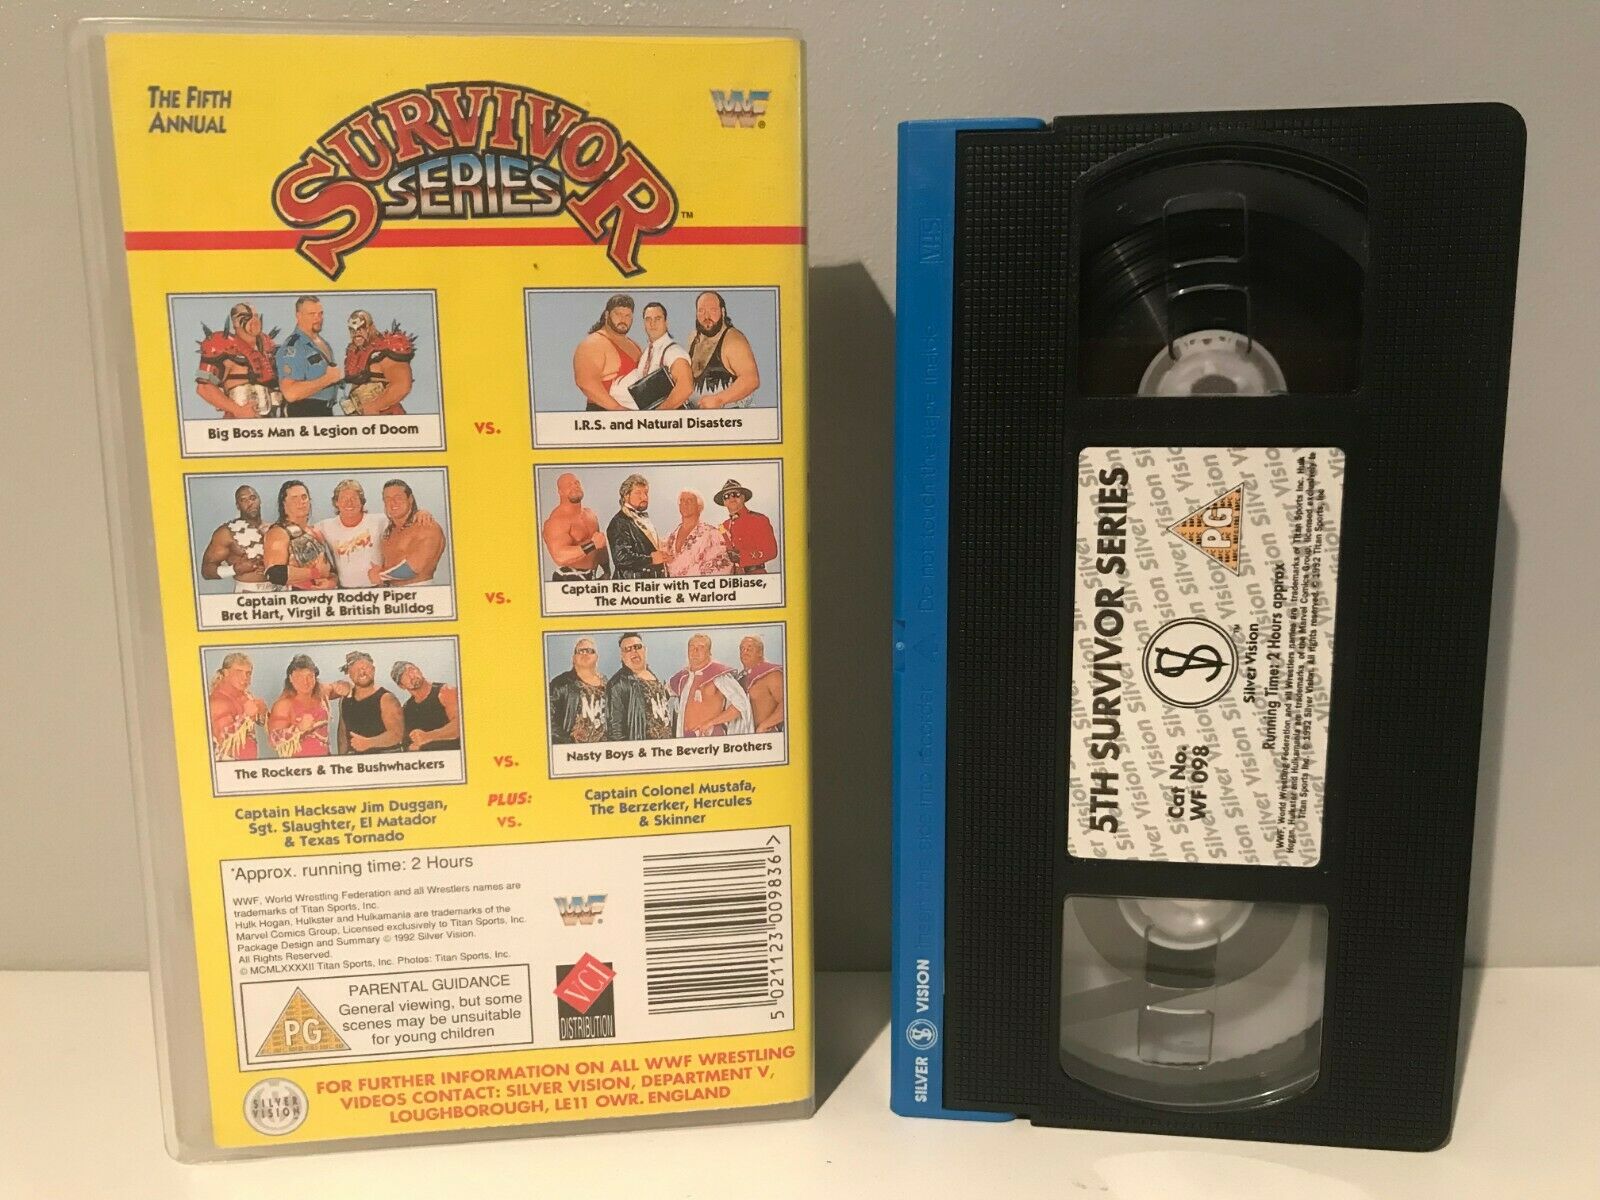 WWF The 5th Annual Survivor Series: The Gravest Challenge - Wrestling - Pal VHS-